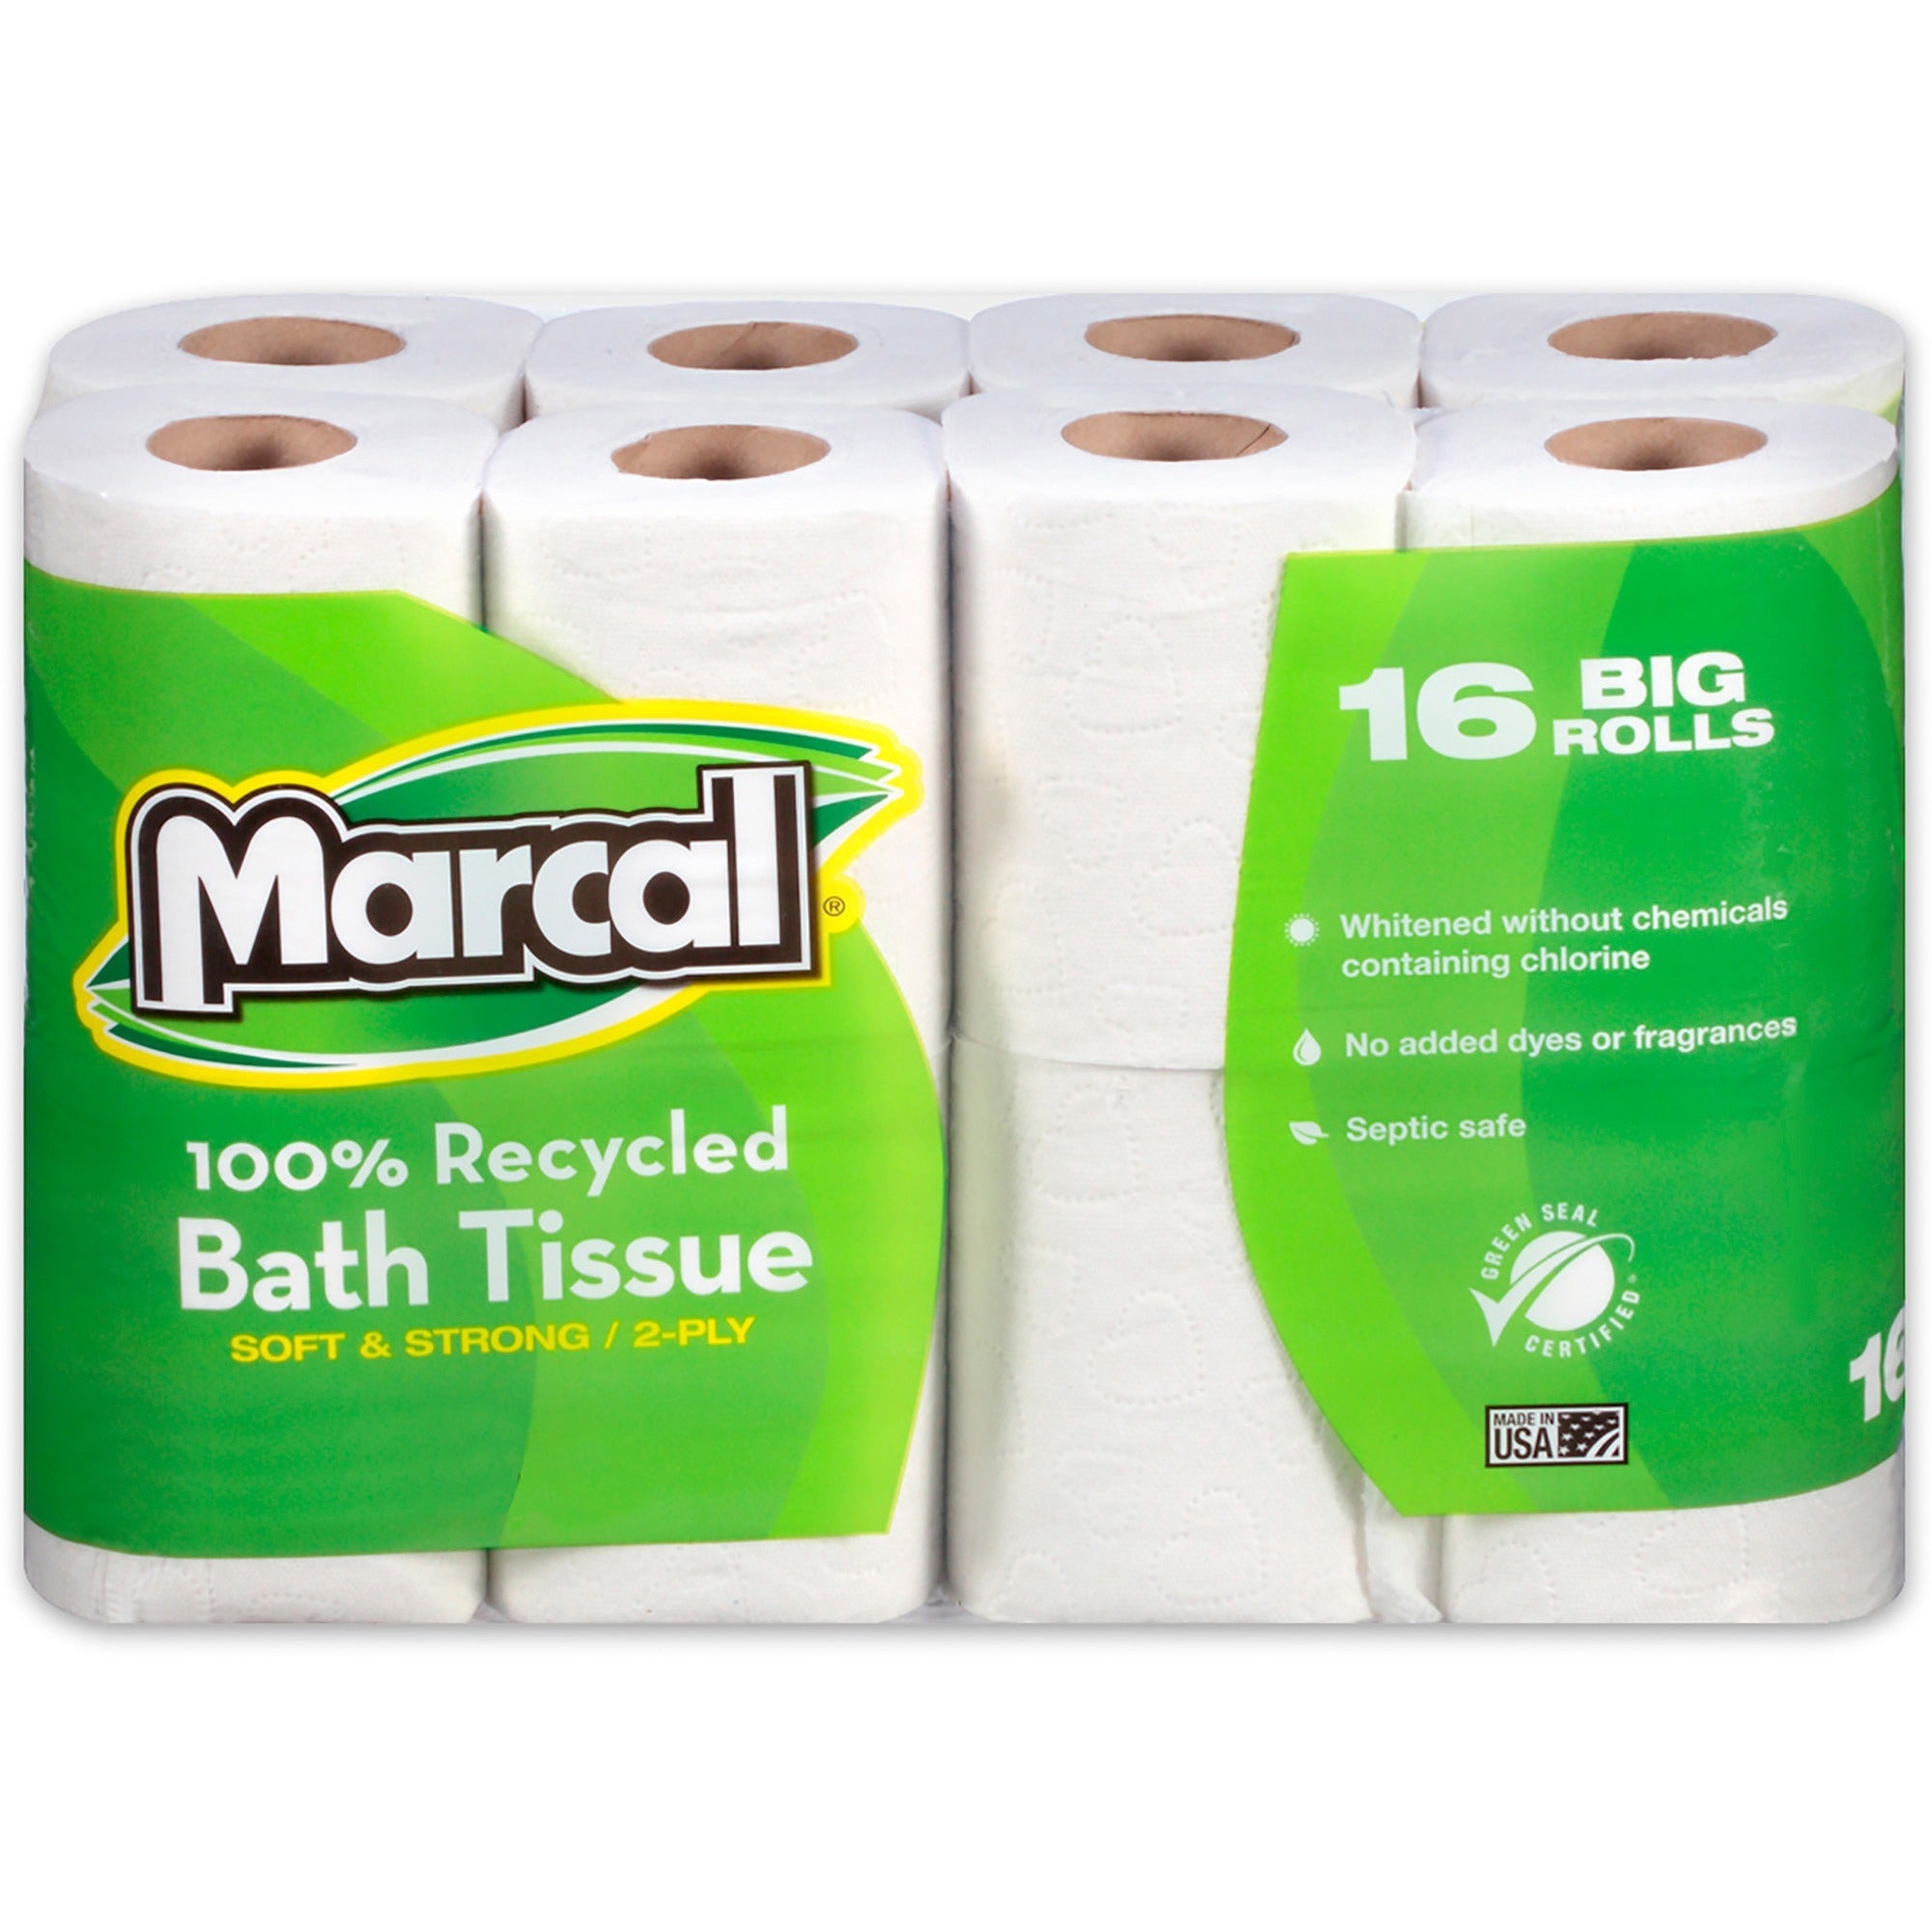 marcal-100%-recycled-soft-strong-bath-tissue-2-ply-420-x-360-168-sheets-roll-white-soft-strong-septic-safe-hypoallergenic-for-bathroom-16-rolls-per-container-6-carton_mrc16466ct - 2